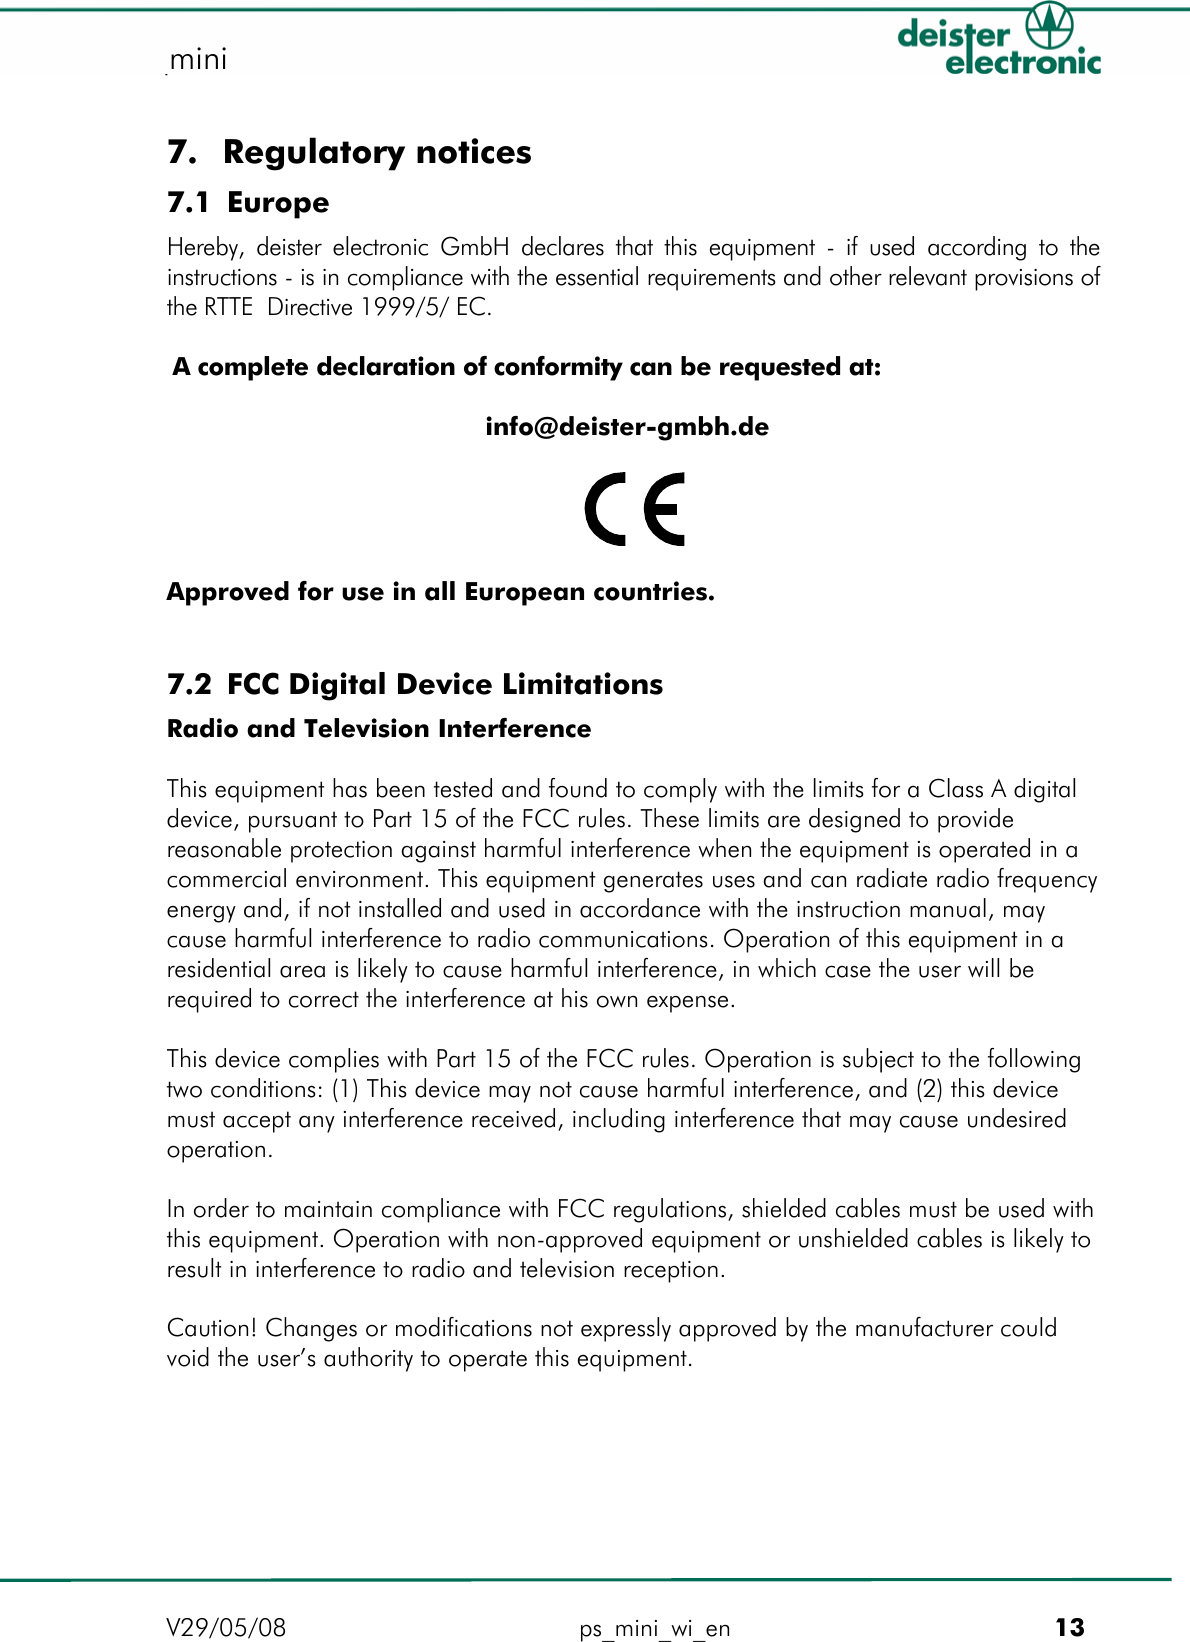   proxSafe mini mini  7. Regulatory notices 7.1 Europe Hereby, deister electronic GmbH declares that this equipment - if used according to the instructions - is in compliance with the essential requirements and other relevant provisions of the RTTE  Directive 1999/5/ EC.  A complete declaration of conformity can be requested at:  info@deister-gmbh.de    Approved for use in all European countries.   7.2 FCC Digital Device Limitations Radio and Television Interference  This equipment has been tested and found to comply with the limits for a Class A digital device, pursuant to Part 15 of the FCC rules. These limits are designed to provide reasonable protection against harmful interference when the equipment is operated in a commercial environment. This equipment generates uses and can radiate radio frequency energy and, if not installed and used in accordance with the instruction manual, may cause harmful interference to radio communications. Operation of this equipment in a residential area is likely to cause harmful interference, in which case the user will be required to correct the interference at his own expense.  This device complies with Part 15 of the FCC rules. Operation is subject to the following two conditions: (1) This device may not cause harmful interference, and (2) this device must accept any interference received, including interference that may cause undesired operation.  In order to maintain compliance with FCC regulations, shielded cables must be used with this equipment. Operation with non-approved equipment or unshielded cables is likely to result in interference to radio and television reception.  Caution! Changes or modifications not expressly approved by the manufacturer could void the user’s authority to operate this equipment. V29/05/08 ps_mini_wi_en         13 